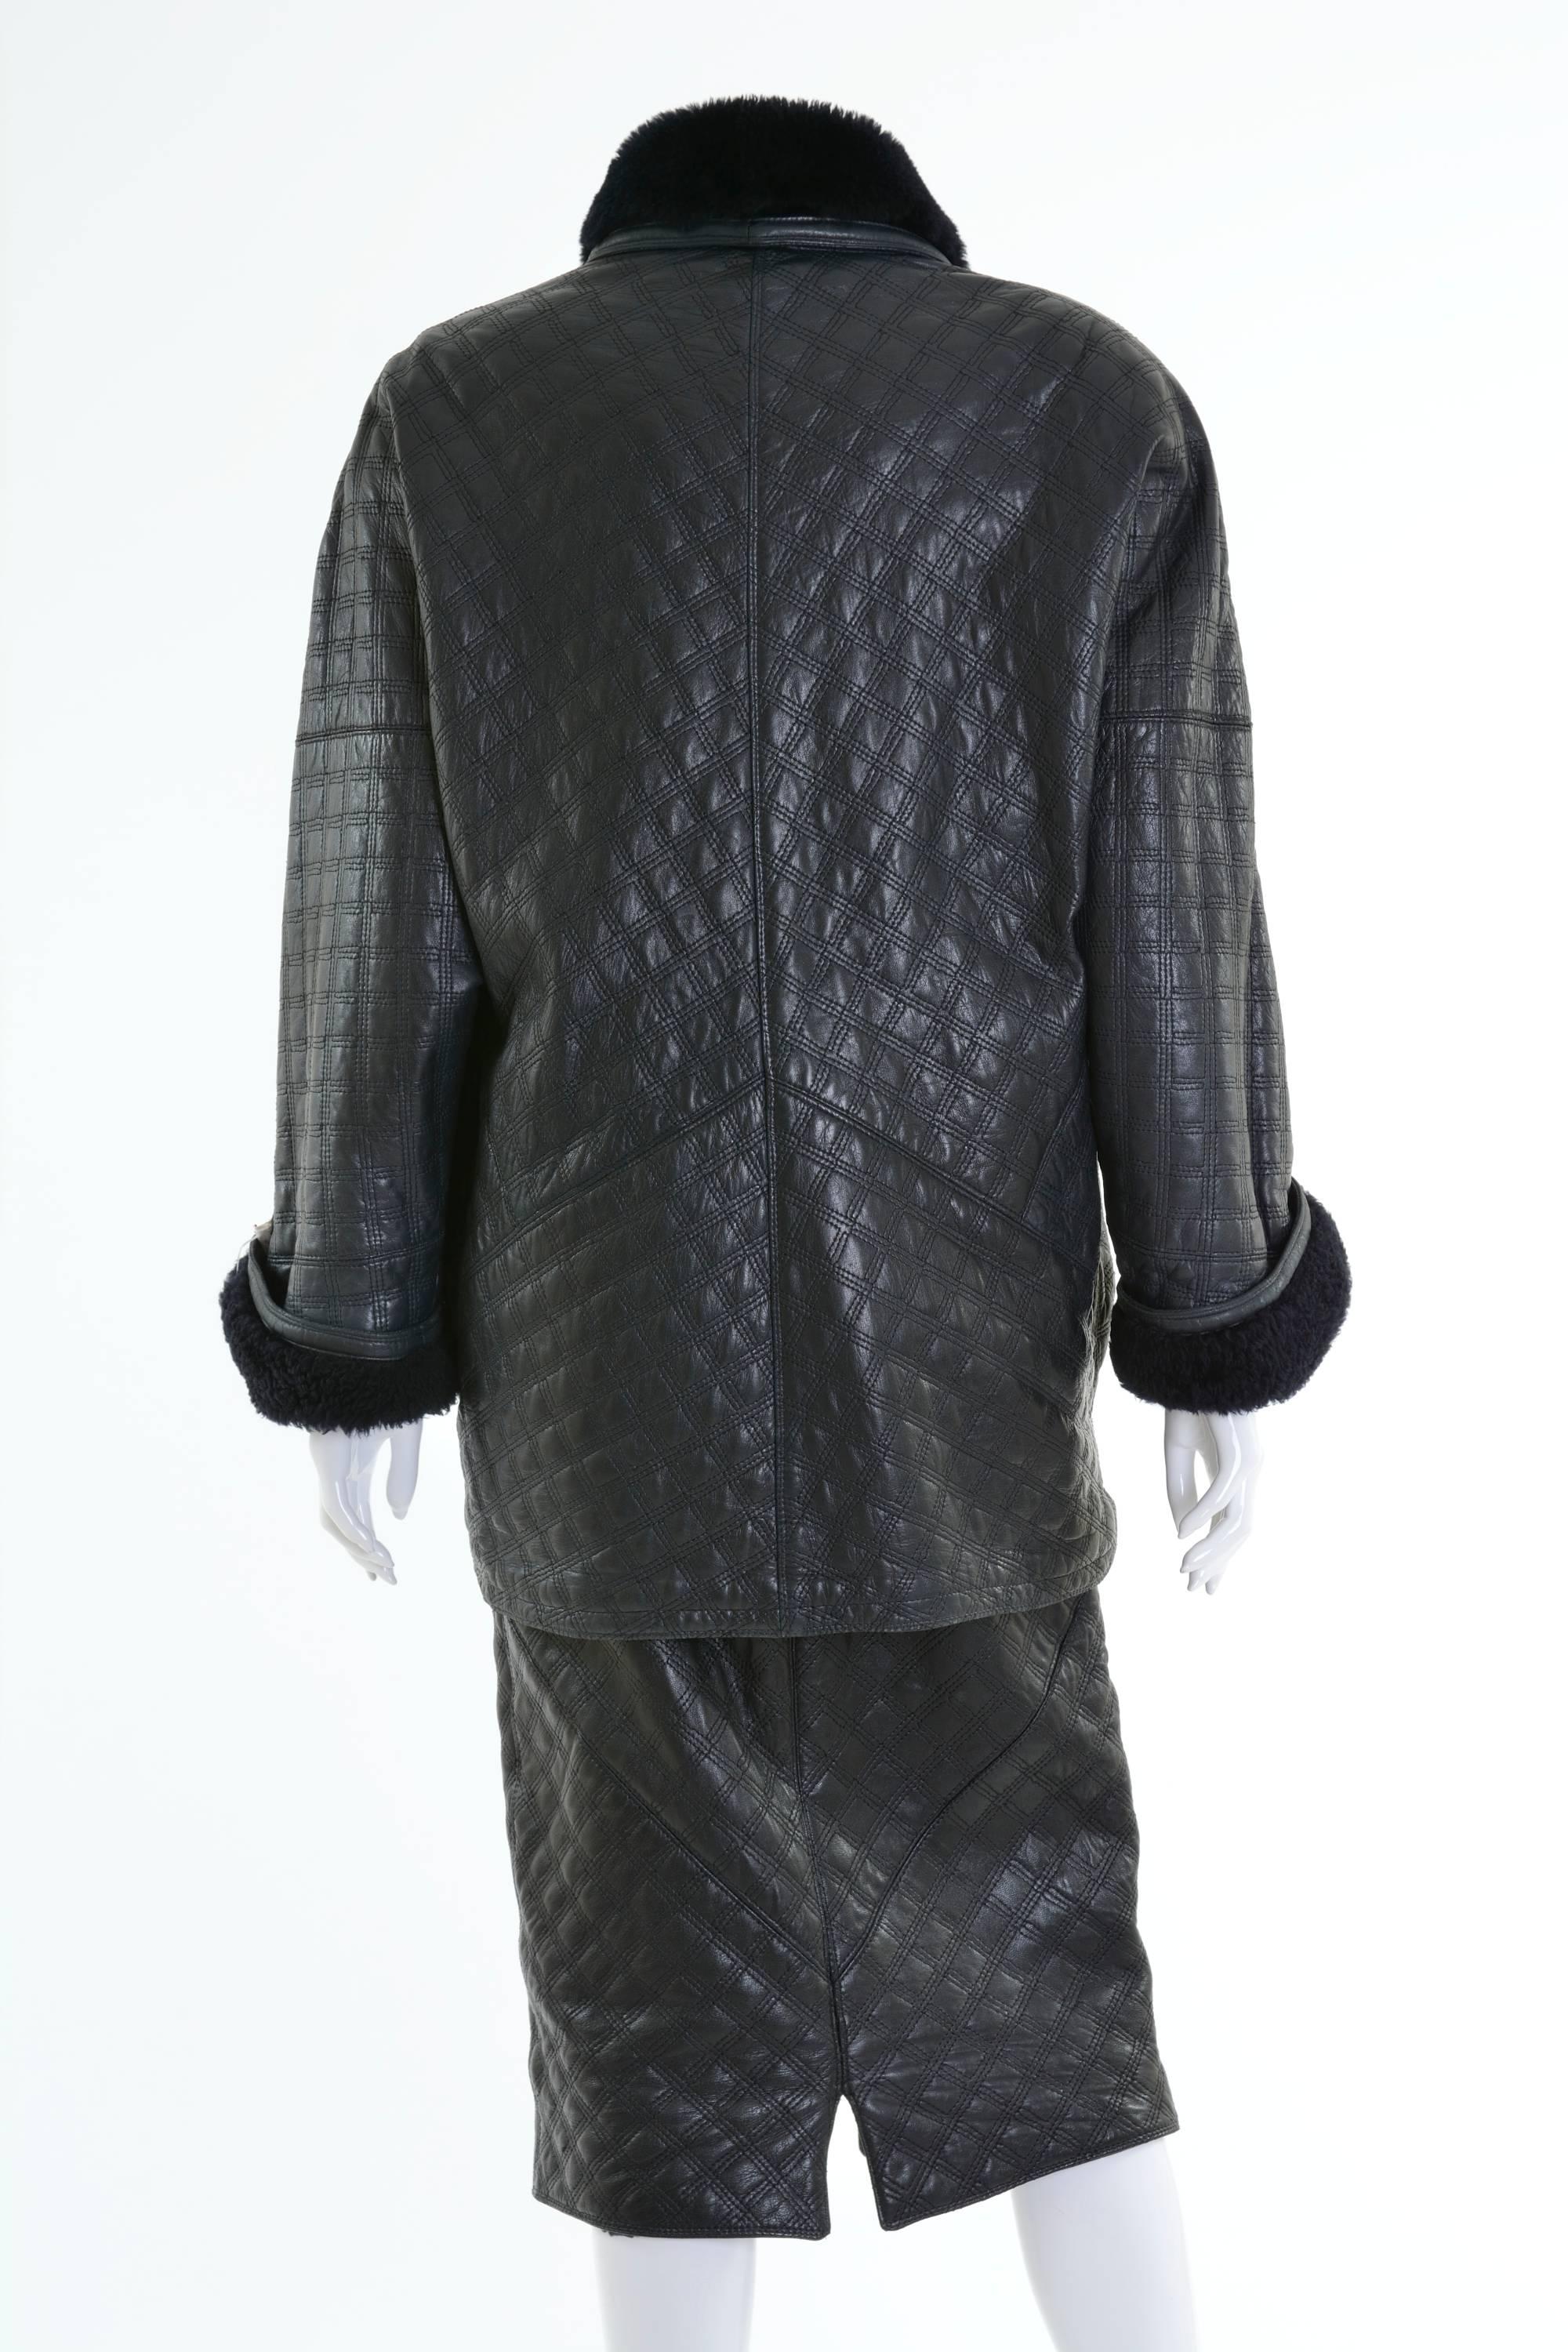 This awesome Gianni Versace suit dress is in a black soft quilted leather and sheepskin. The jacket has oversize line, dolman sleeves, padded shoulder and asymmetric closure, two side pockets and is lined with black warm woolen fabric. The skirt has